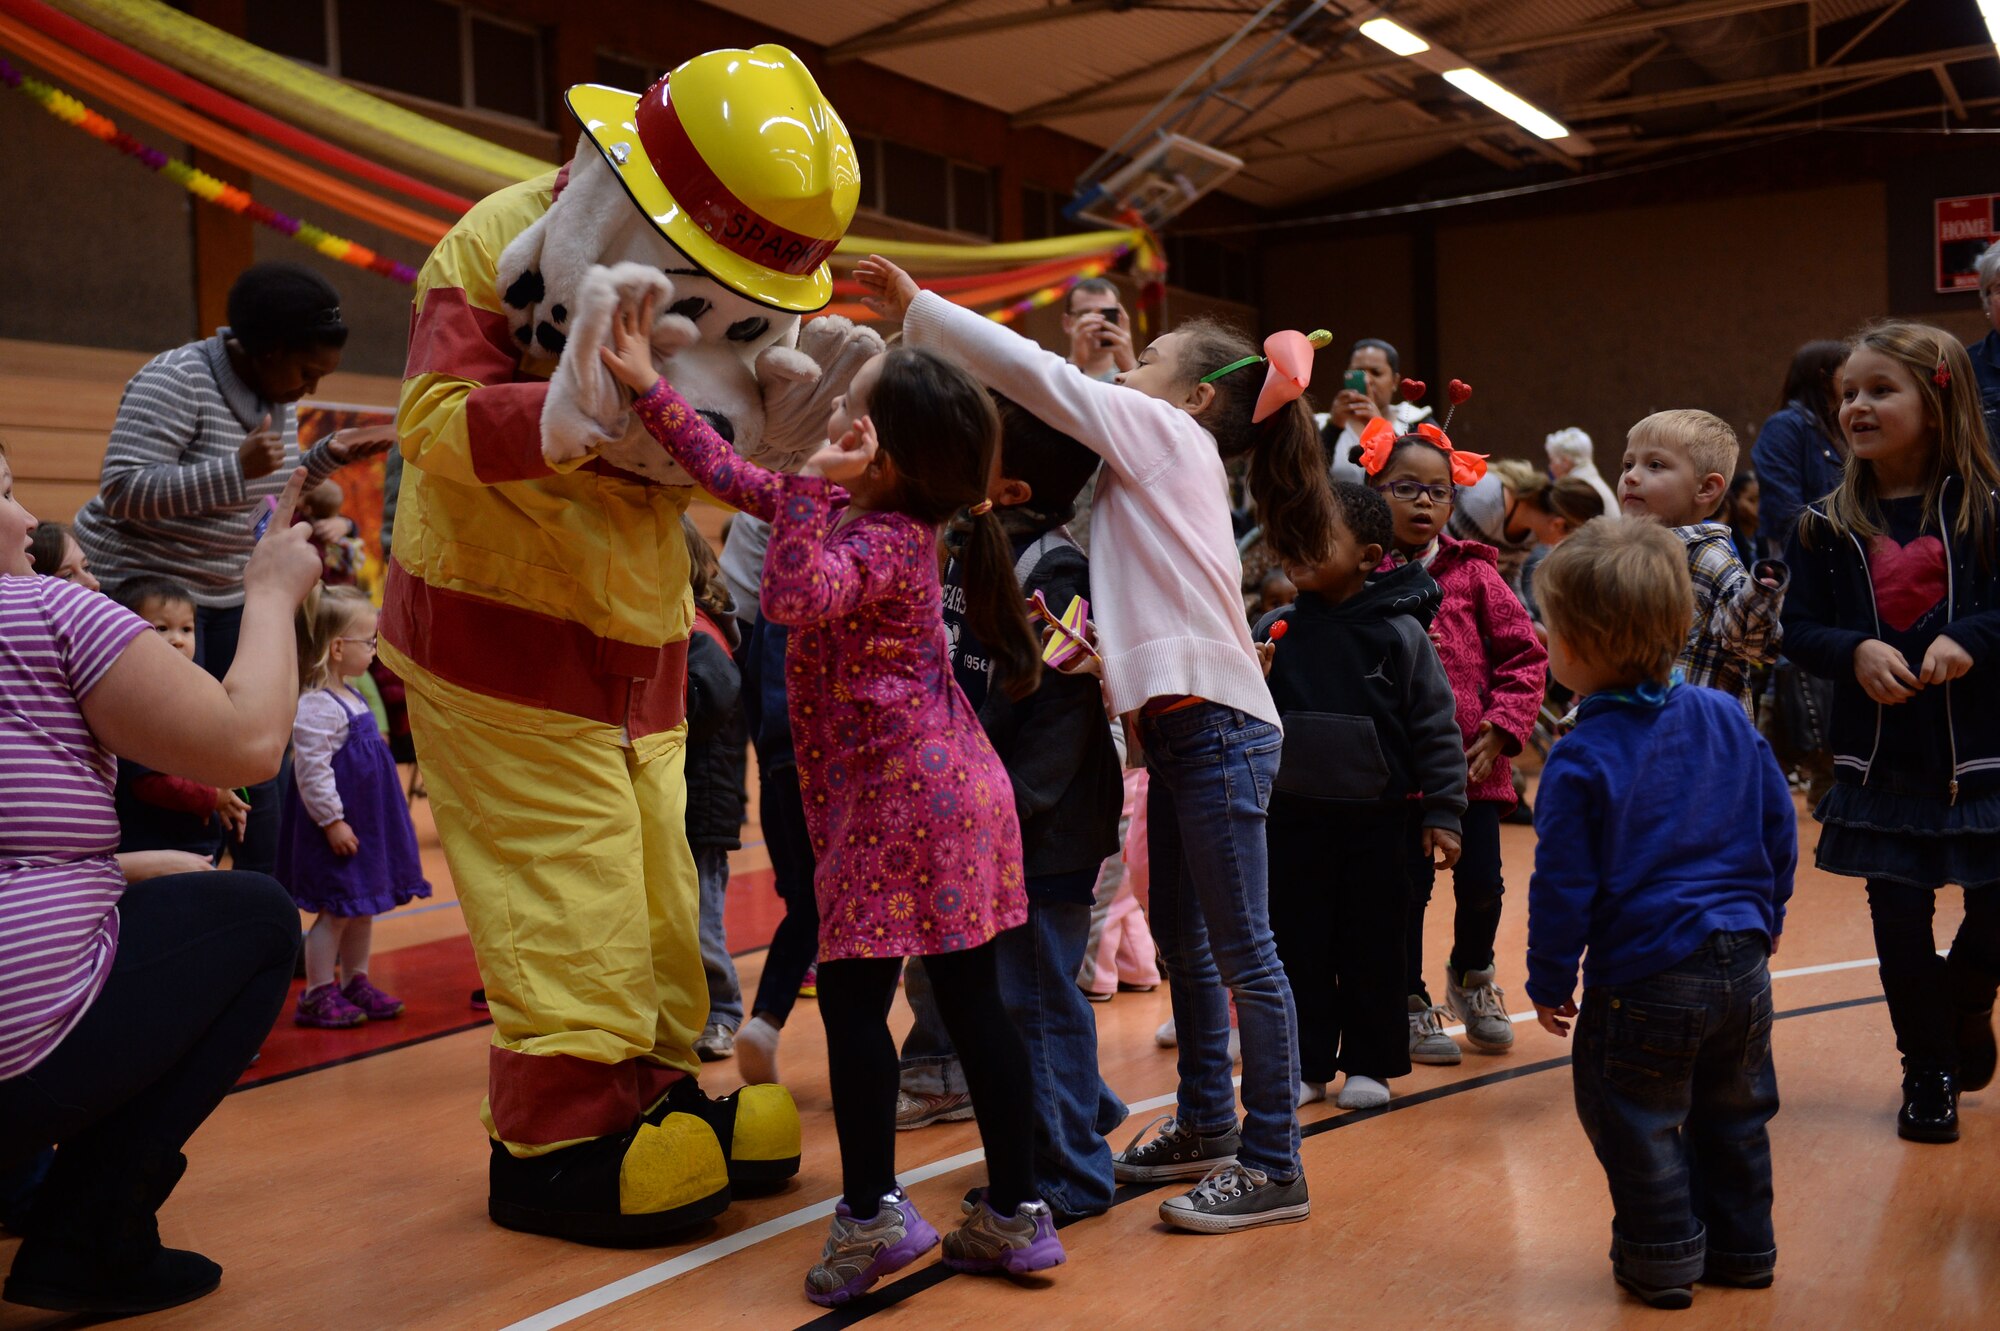 A U.S. Air Force Airman from the 52nd Civil Engineer Squadron fire department dressed as Sparky the Fire Dog high-fives a child during the Spangtacular Family Fall Festival Nov. 21, 2014, in the Skelton Memorial Fitness Center at Spangdahlem Air Base, Germany. Sparky the Fire Dog is the official mascot of the National Fire Protection Agency and made an appearance to interact with the children at the event. (U.S. Air Force photo by Staff Sgt. Daryl Knee/Released)